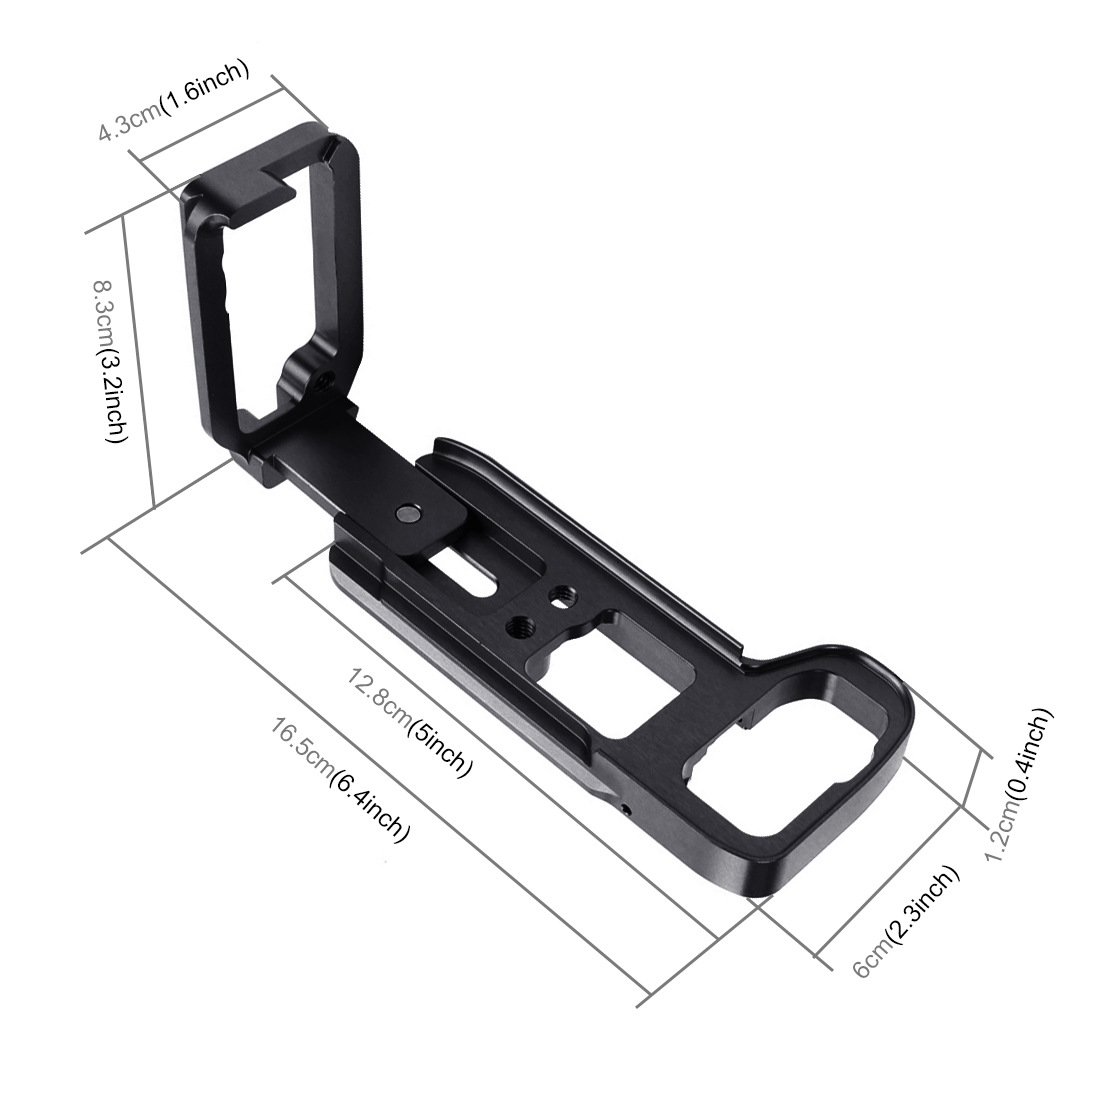 PULUZ-PU3541-Quick-Release-L-Plate-Stabilizer-Base-Holder-for-Sony-A9-A7M3-A7R3-DSLR-Camera-1569171